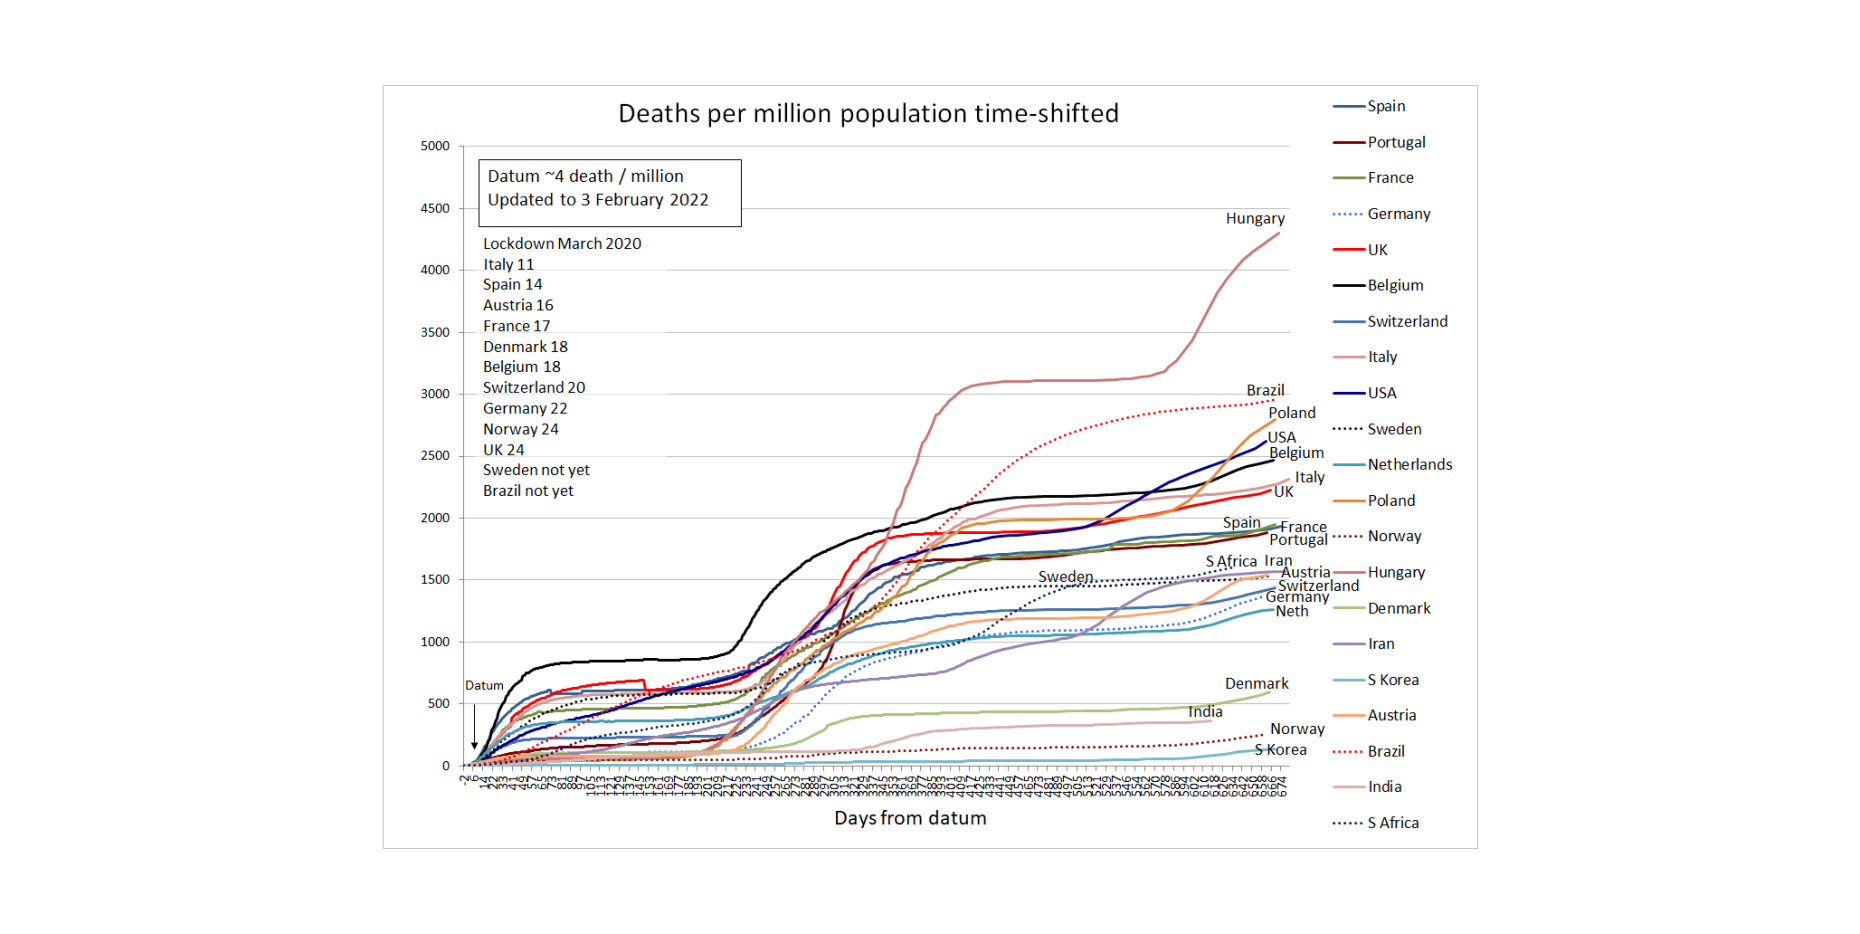 Deaths per million population time-shifted